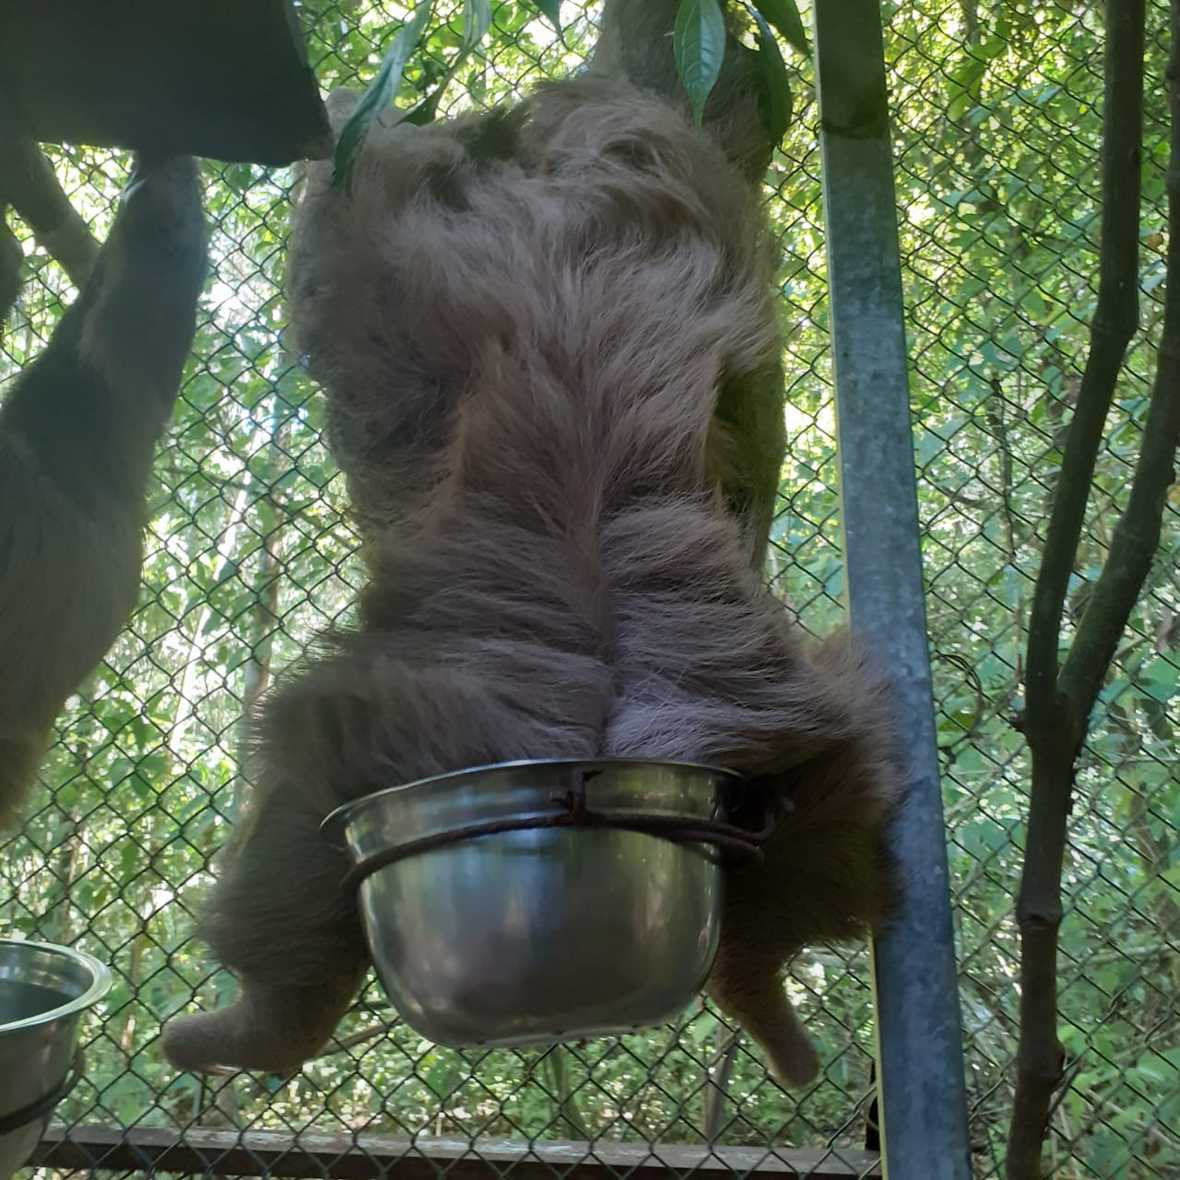 Sloth hangs upside down from fencing with head in metal bowl